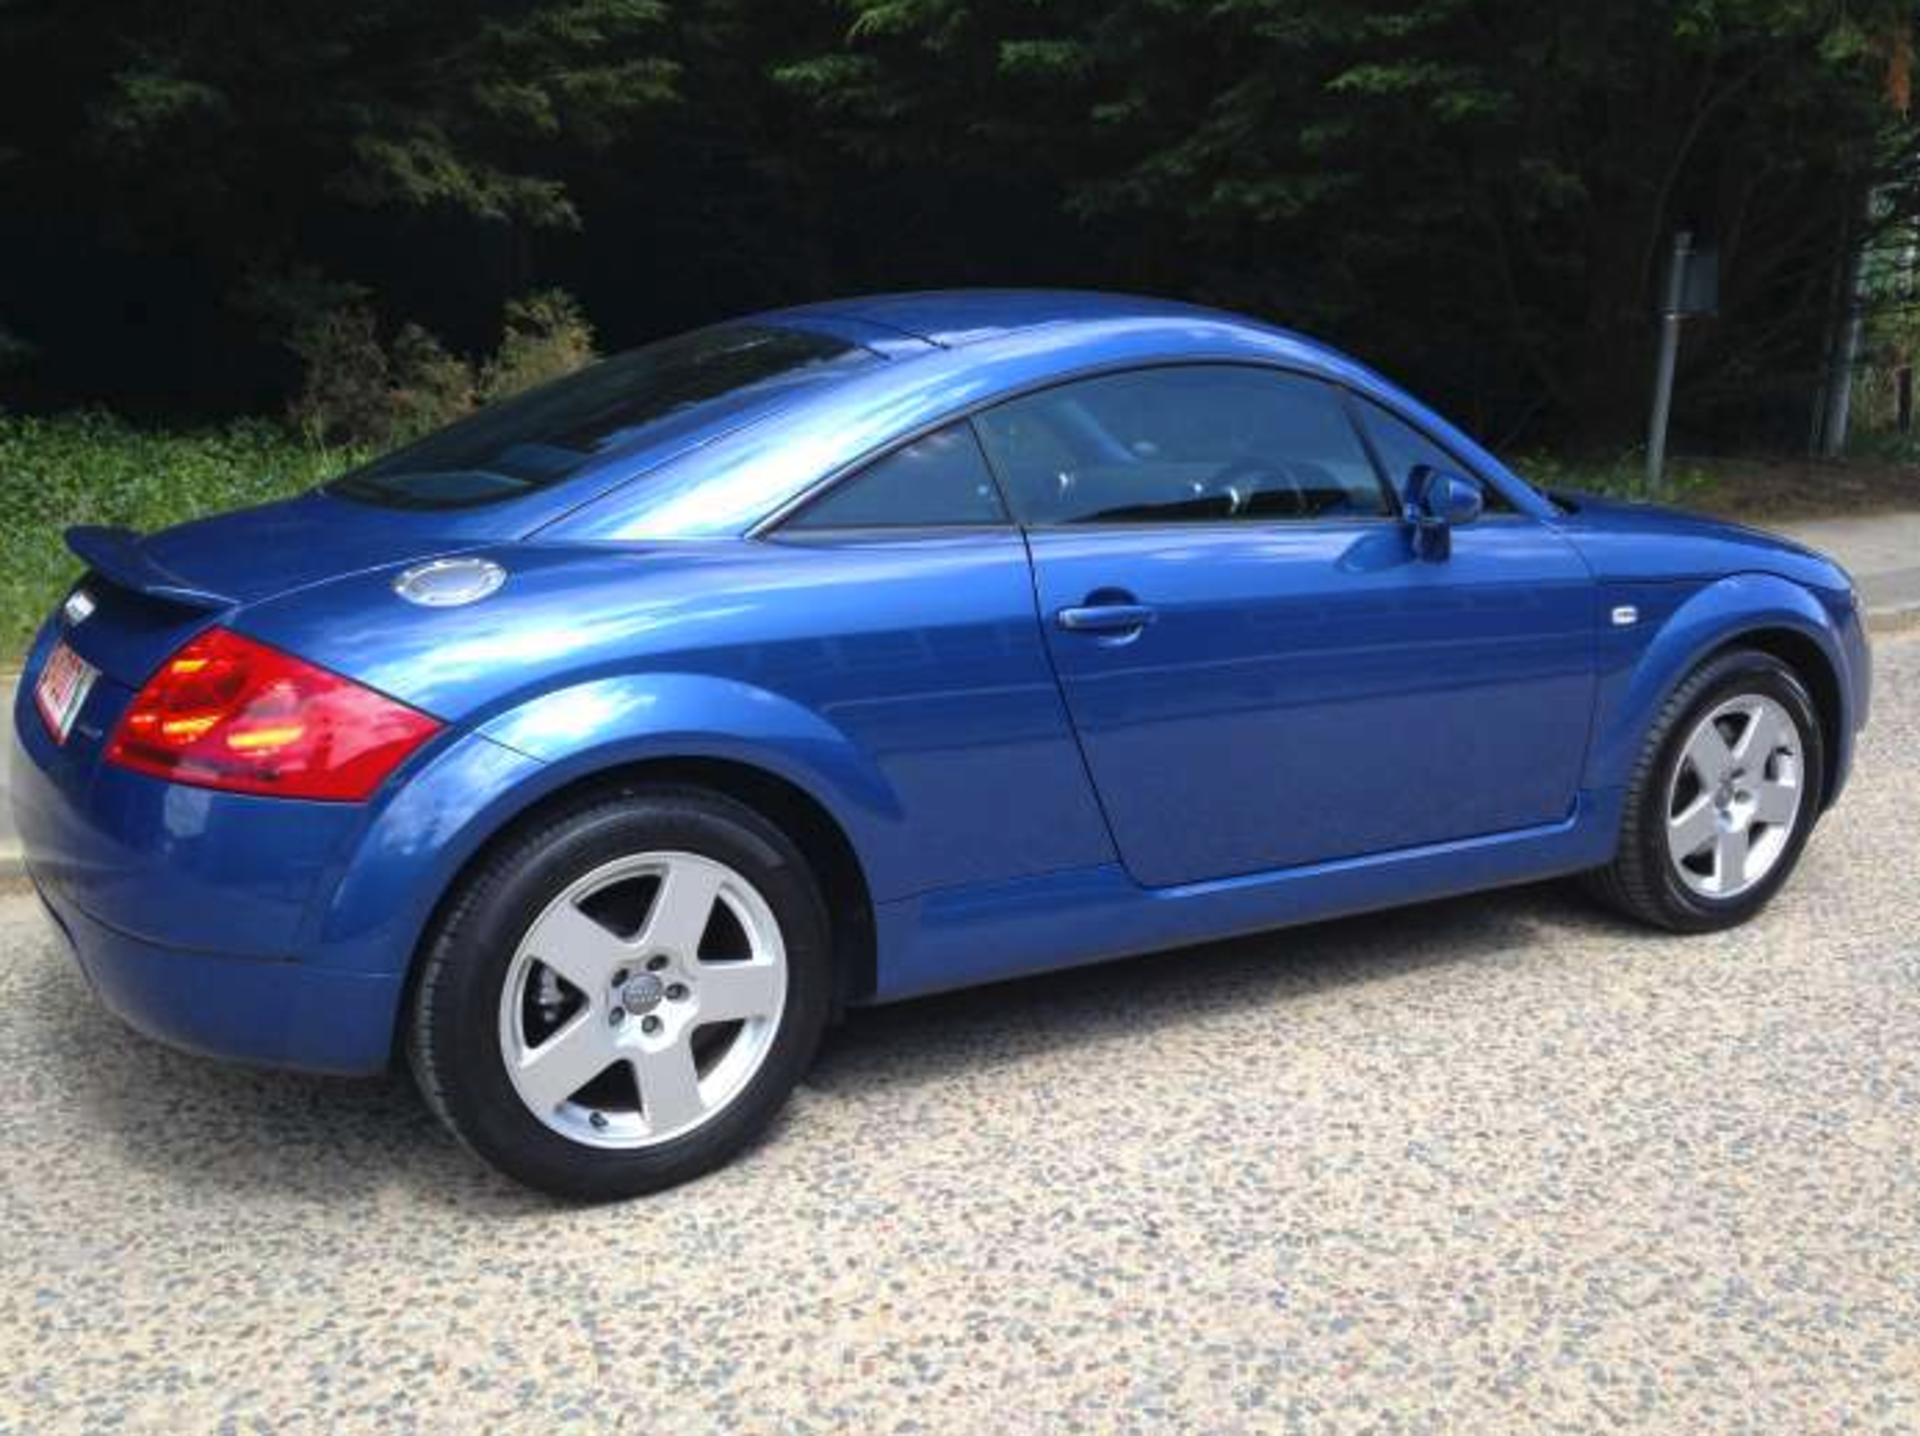 2001 AUDI TT 180 coupe - Image 6 of 14